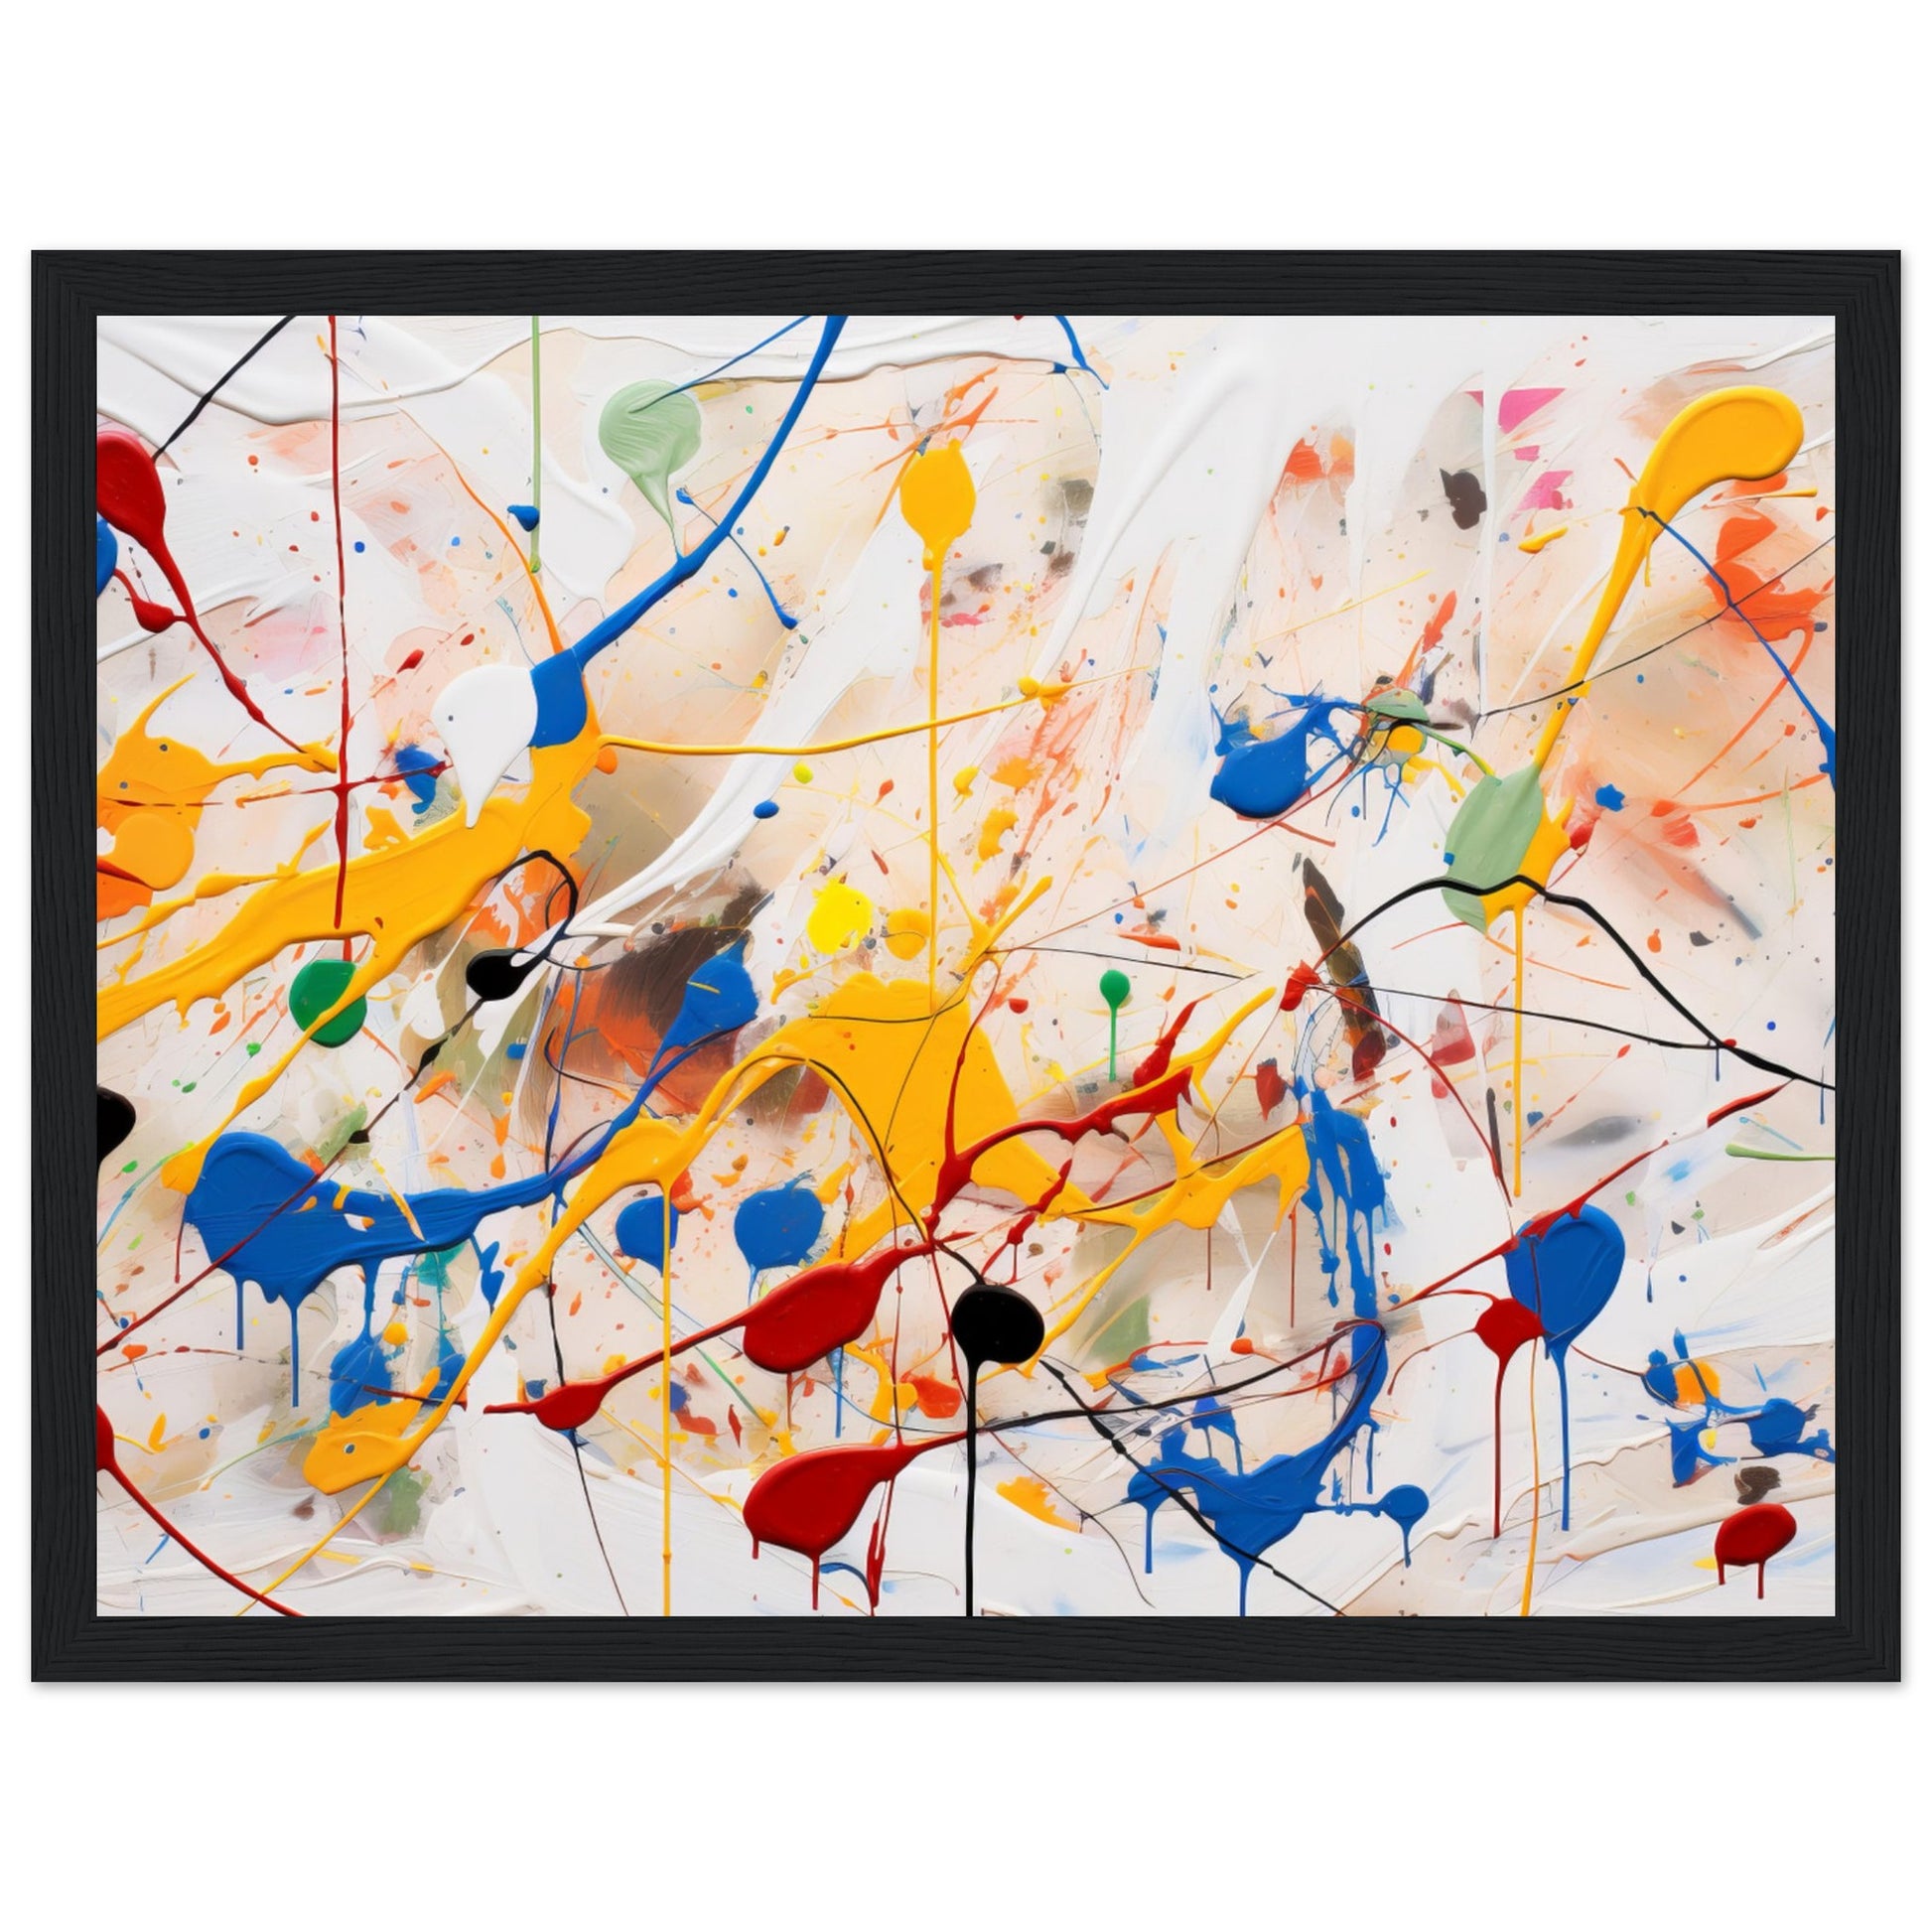 Dynamic Abstract Art #08 - Pollock Inspired No frame 70x100 cm / 28x40"